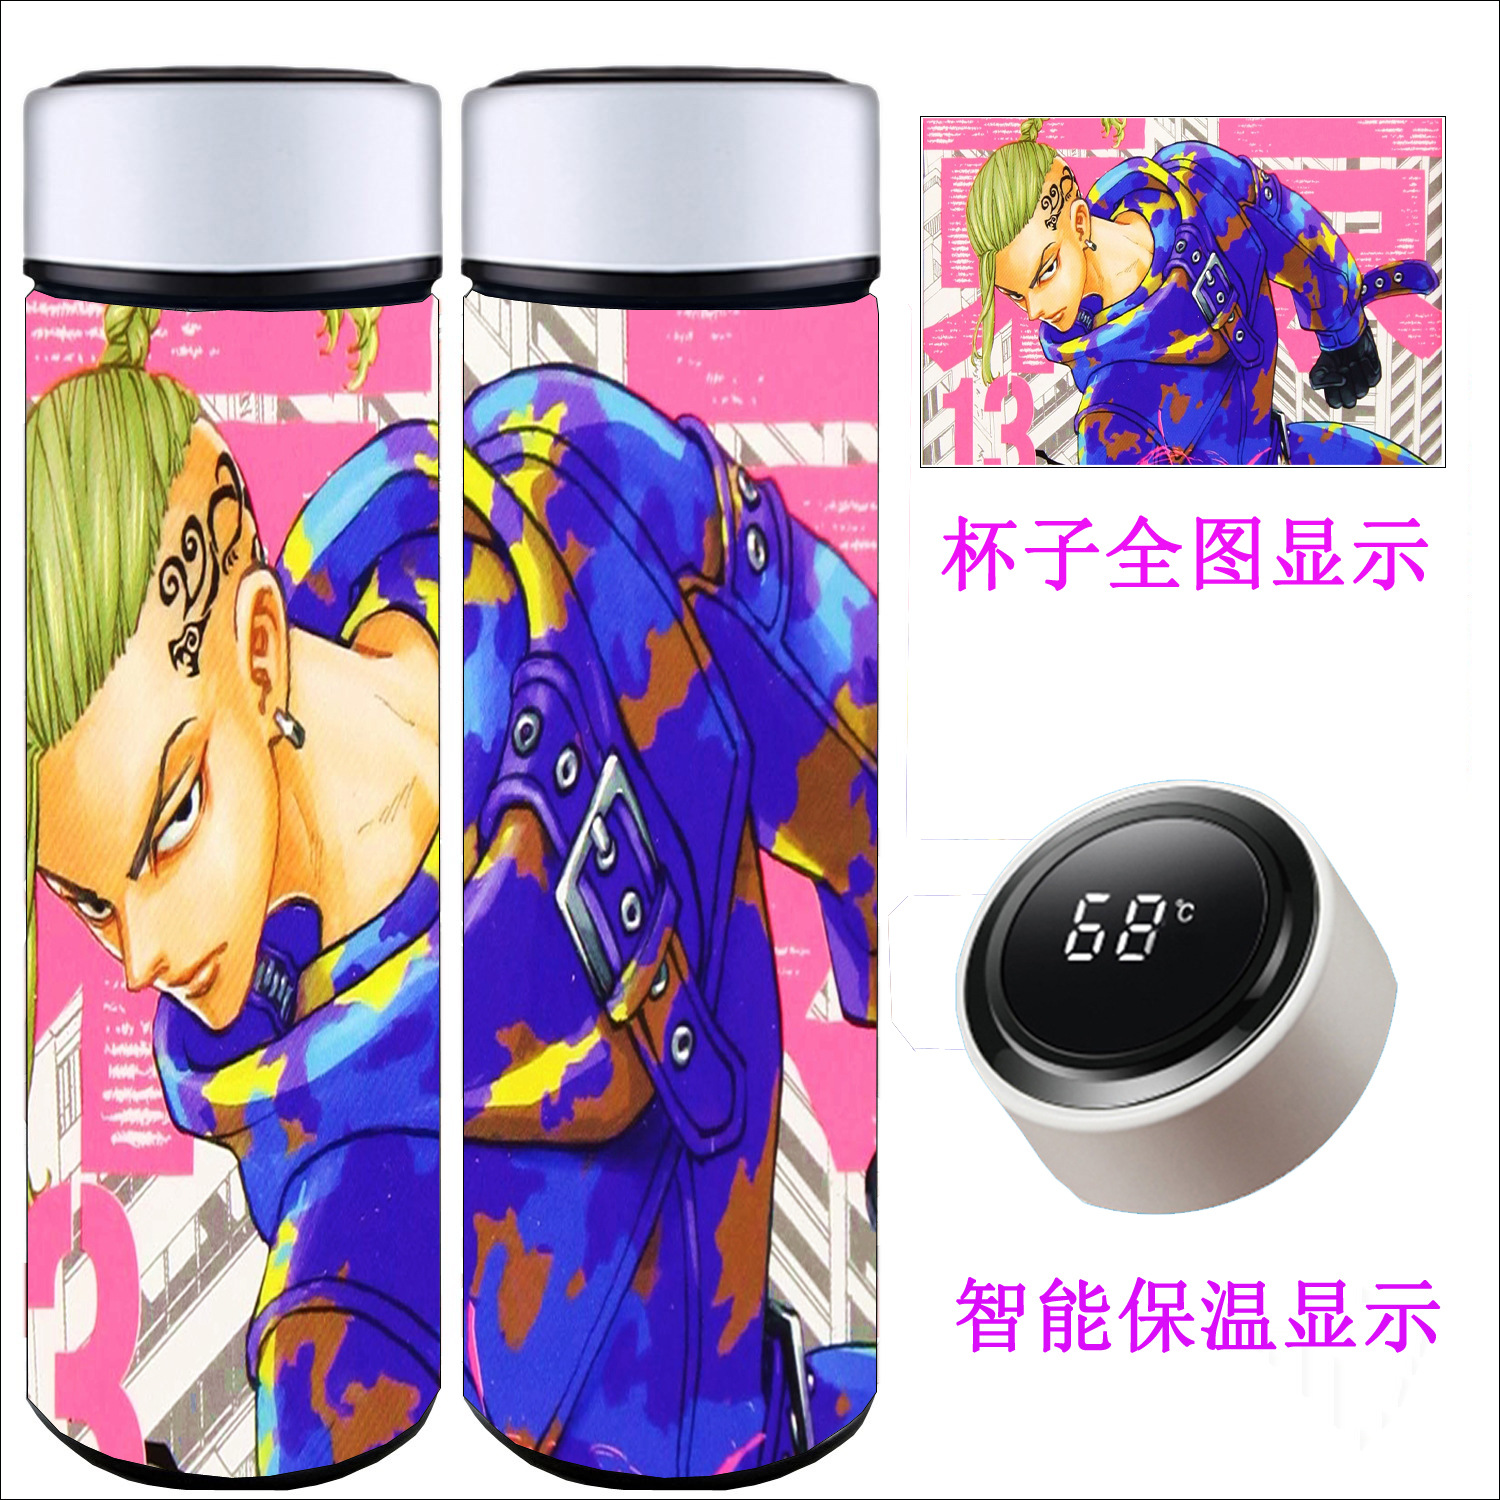 Tokyo Revengers anime Intelligent temperature measuring water cup 500ml